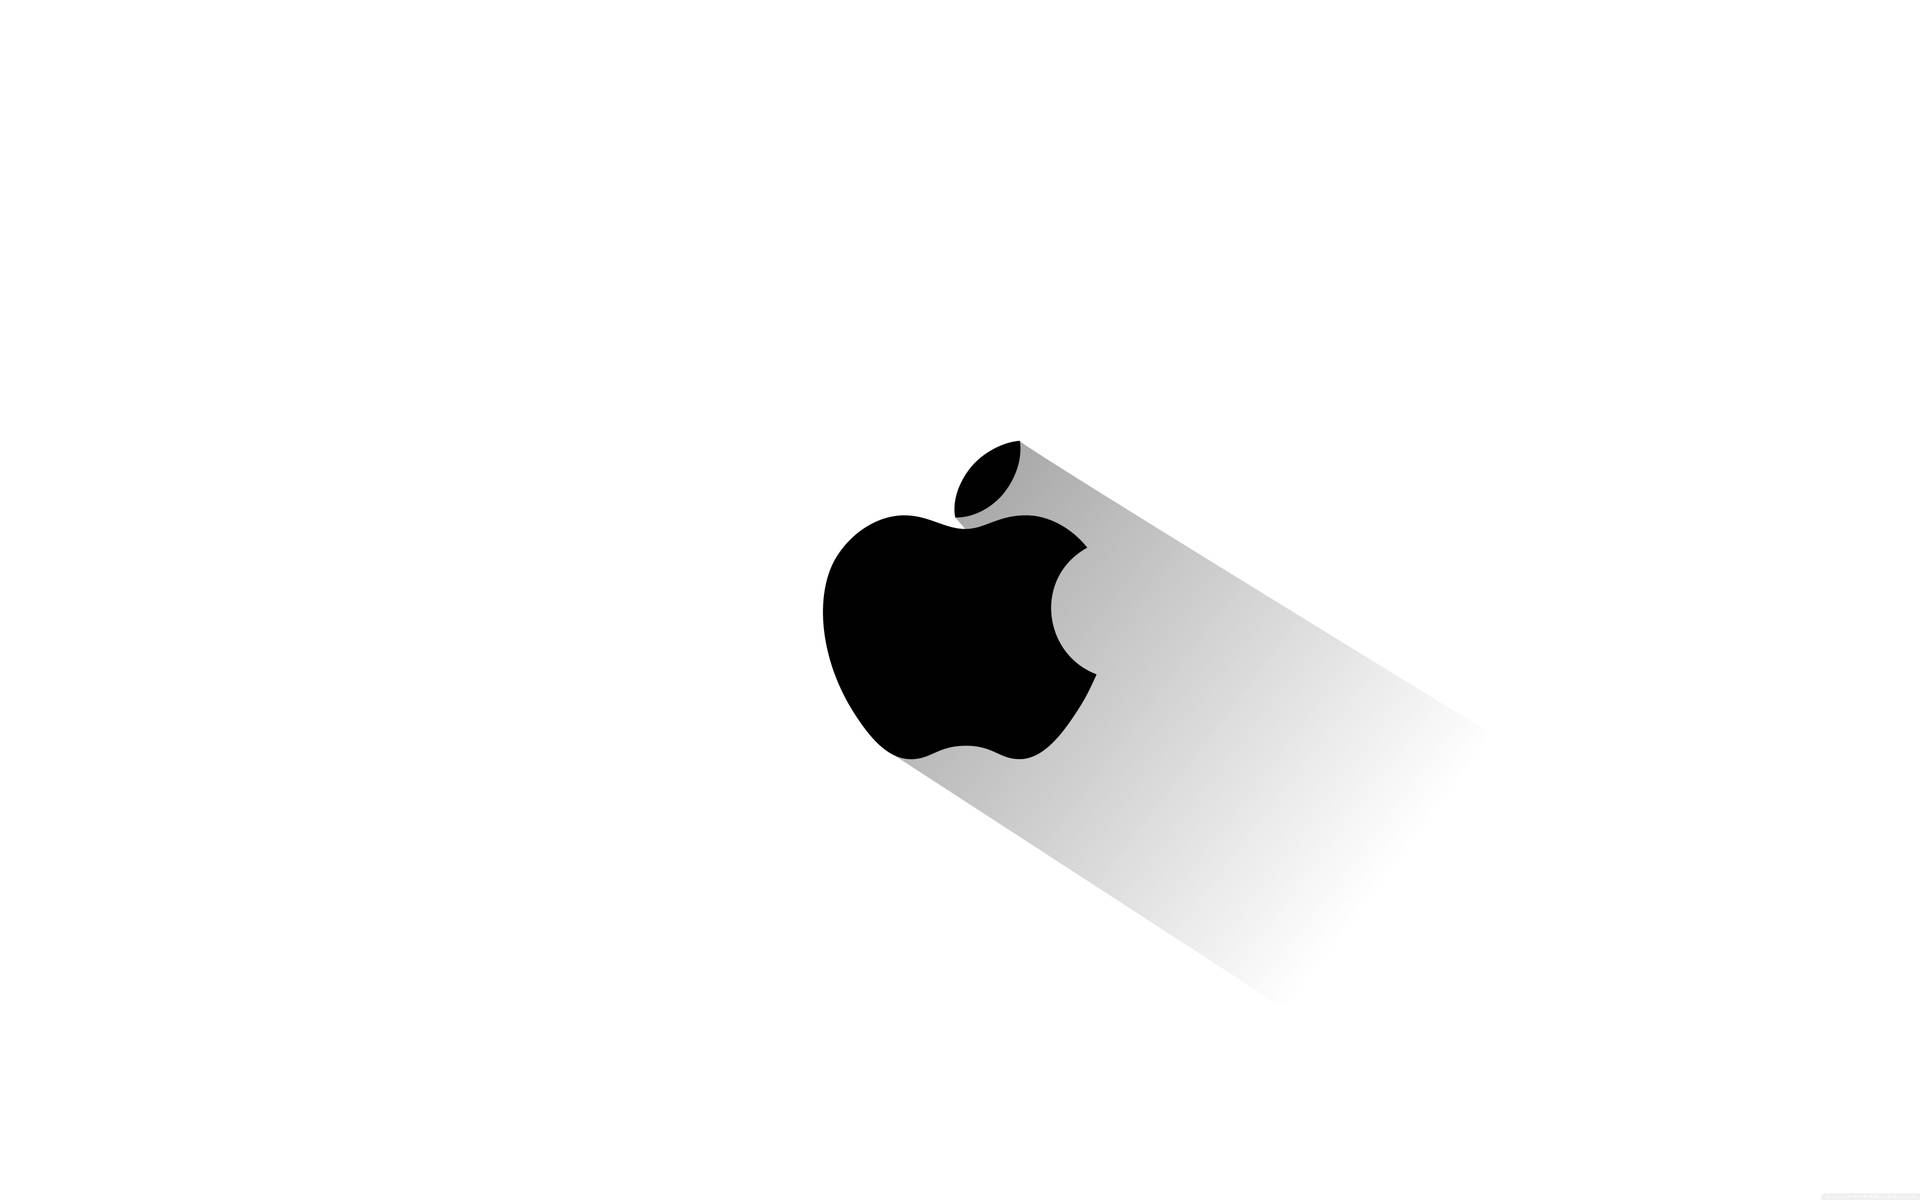 Black Apple Logo With Shadow On White